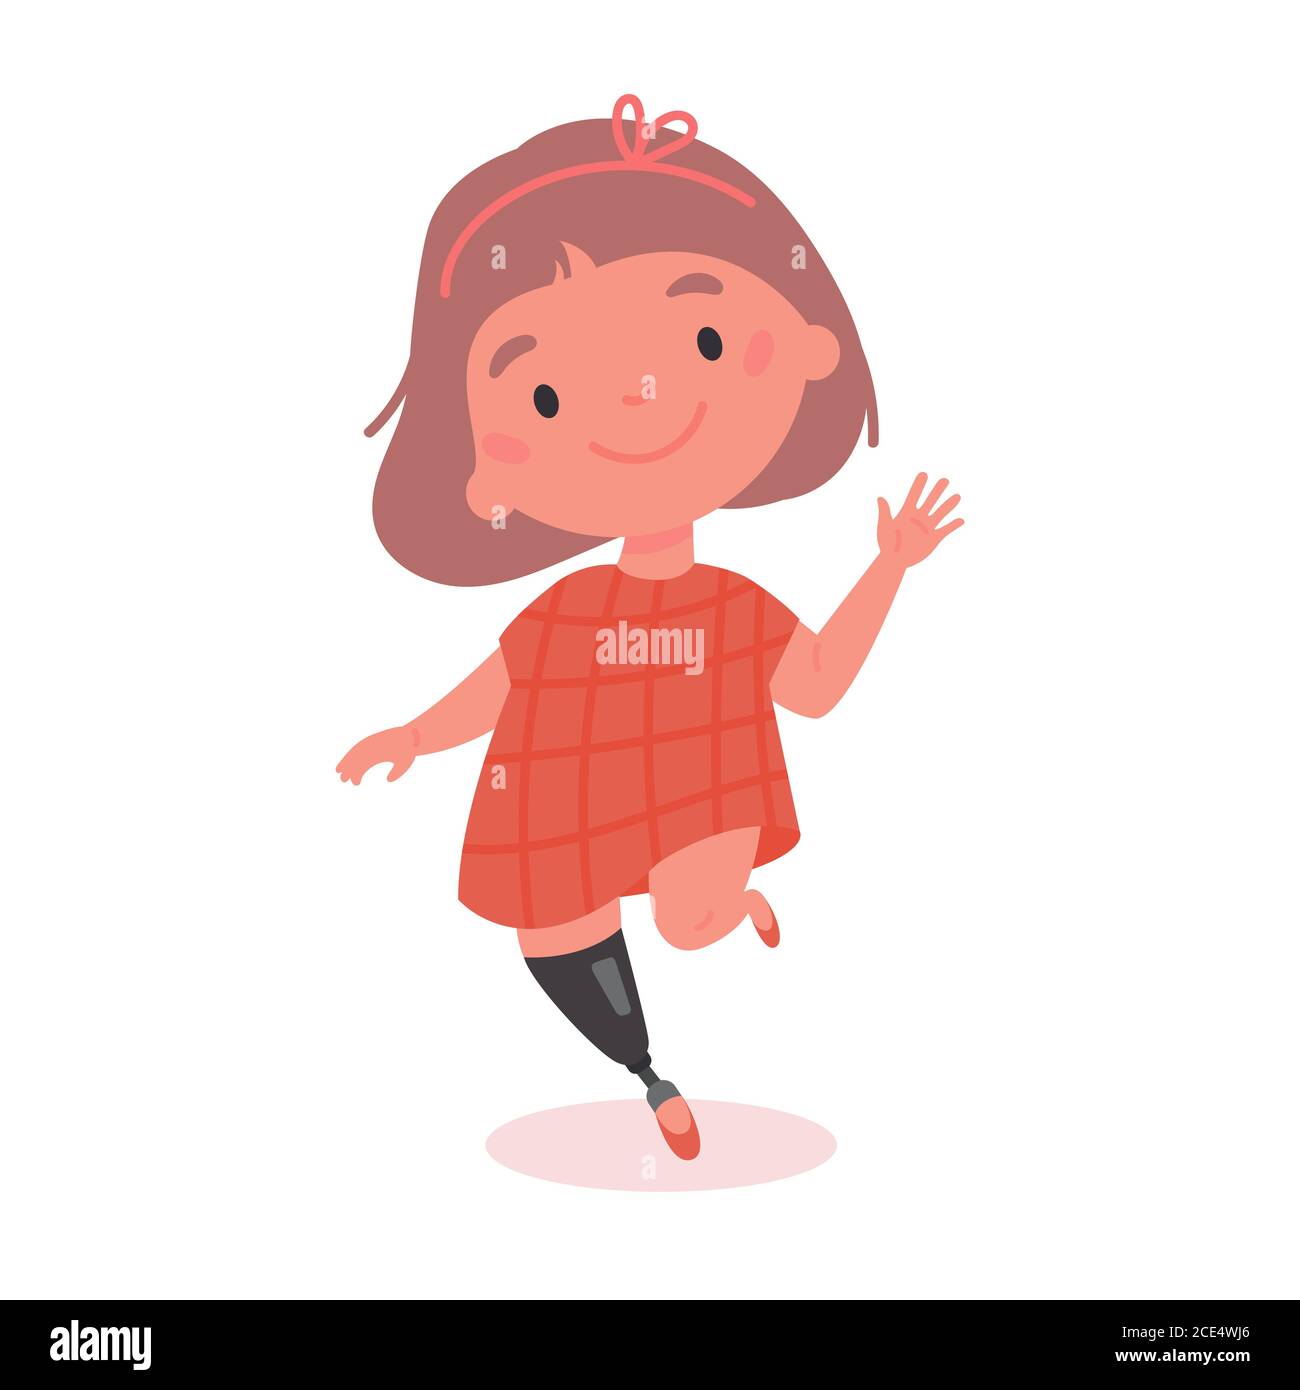 Little kid with artificial limb Stock Vector